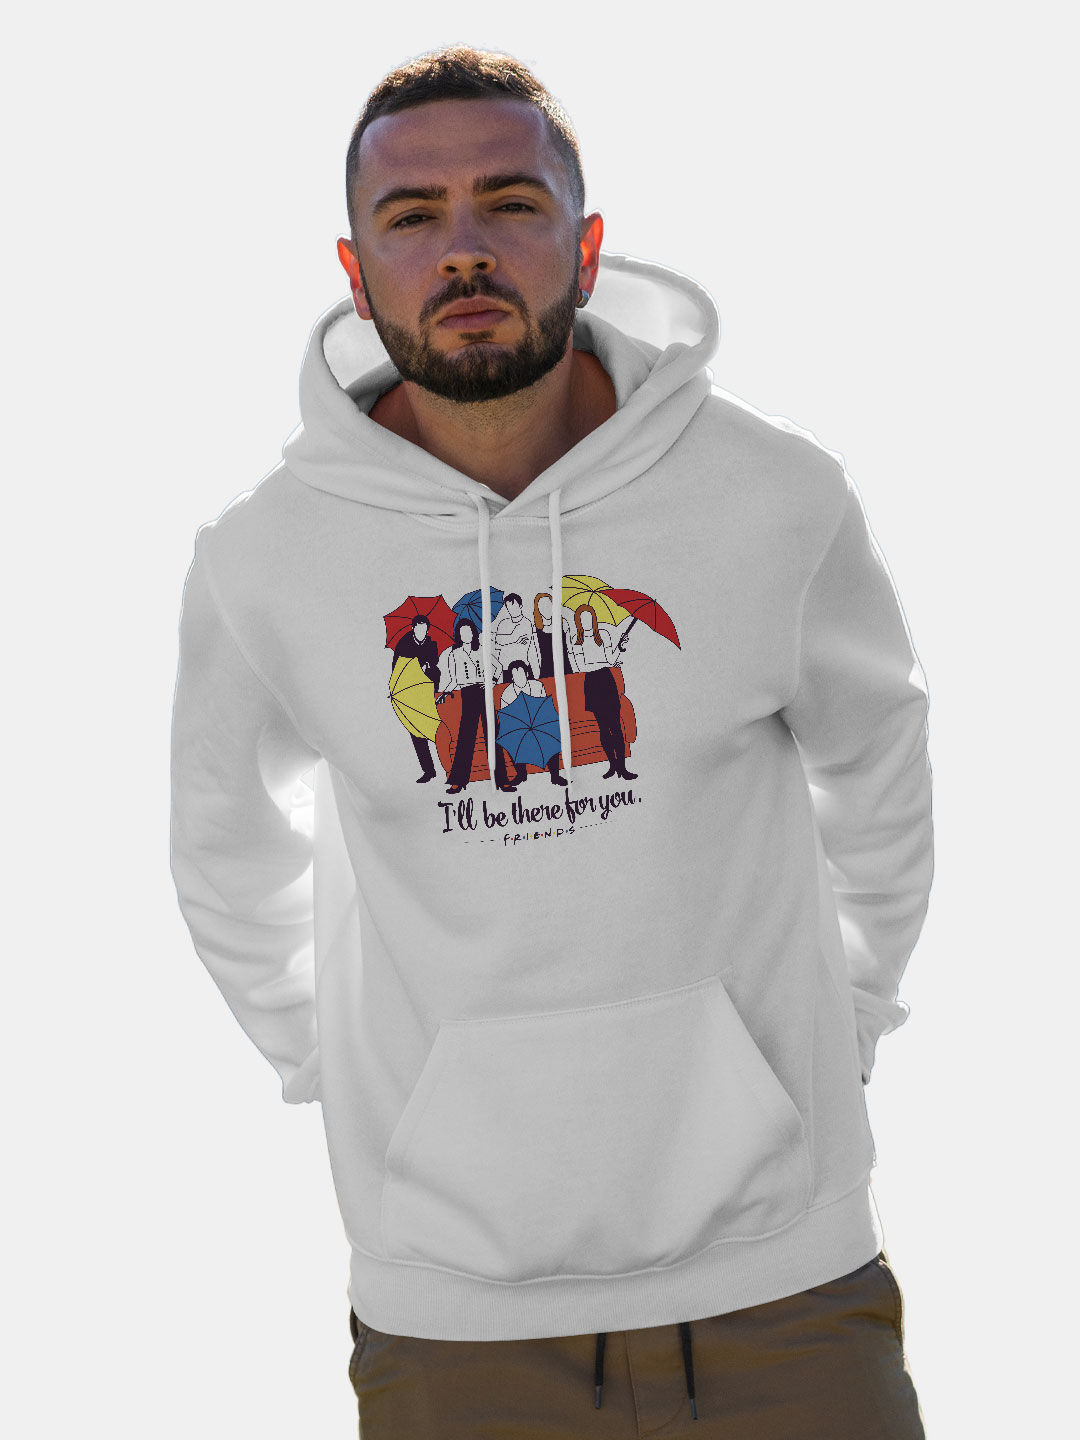 Buy Friends Ill be there for you - Hoodie Hoodies Online